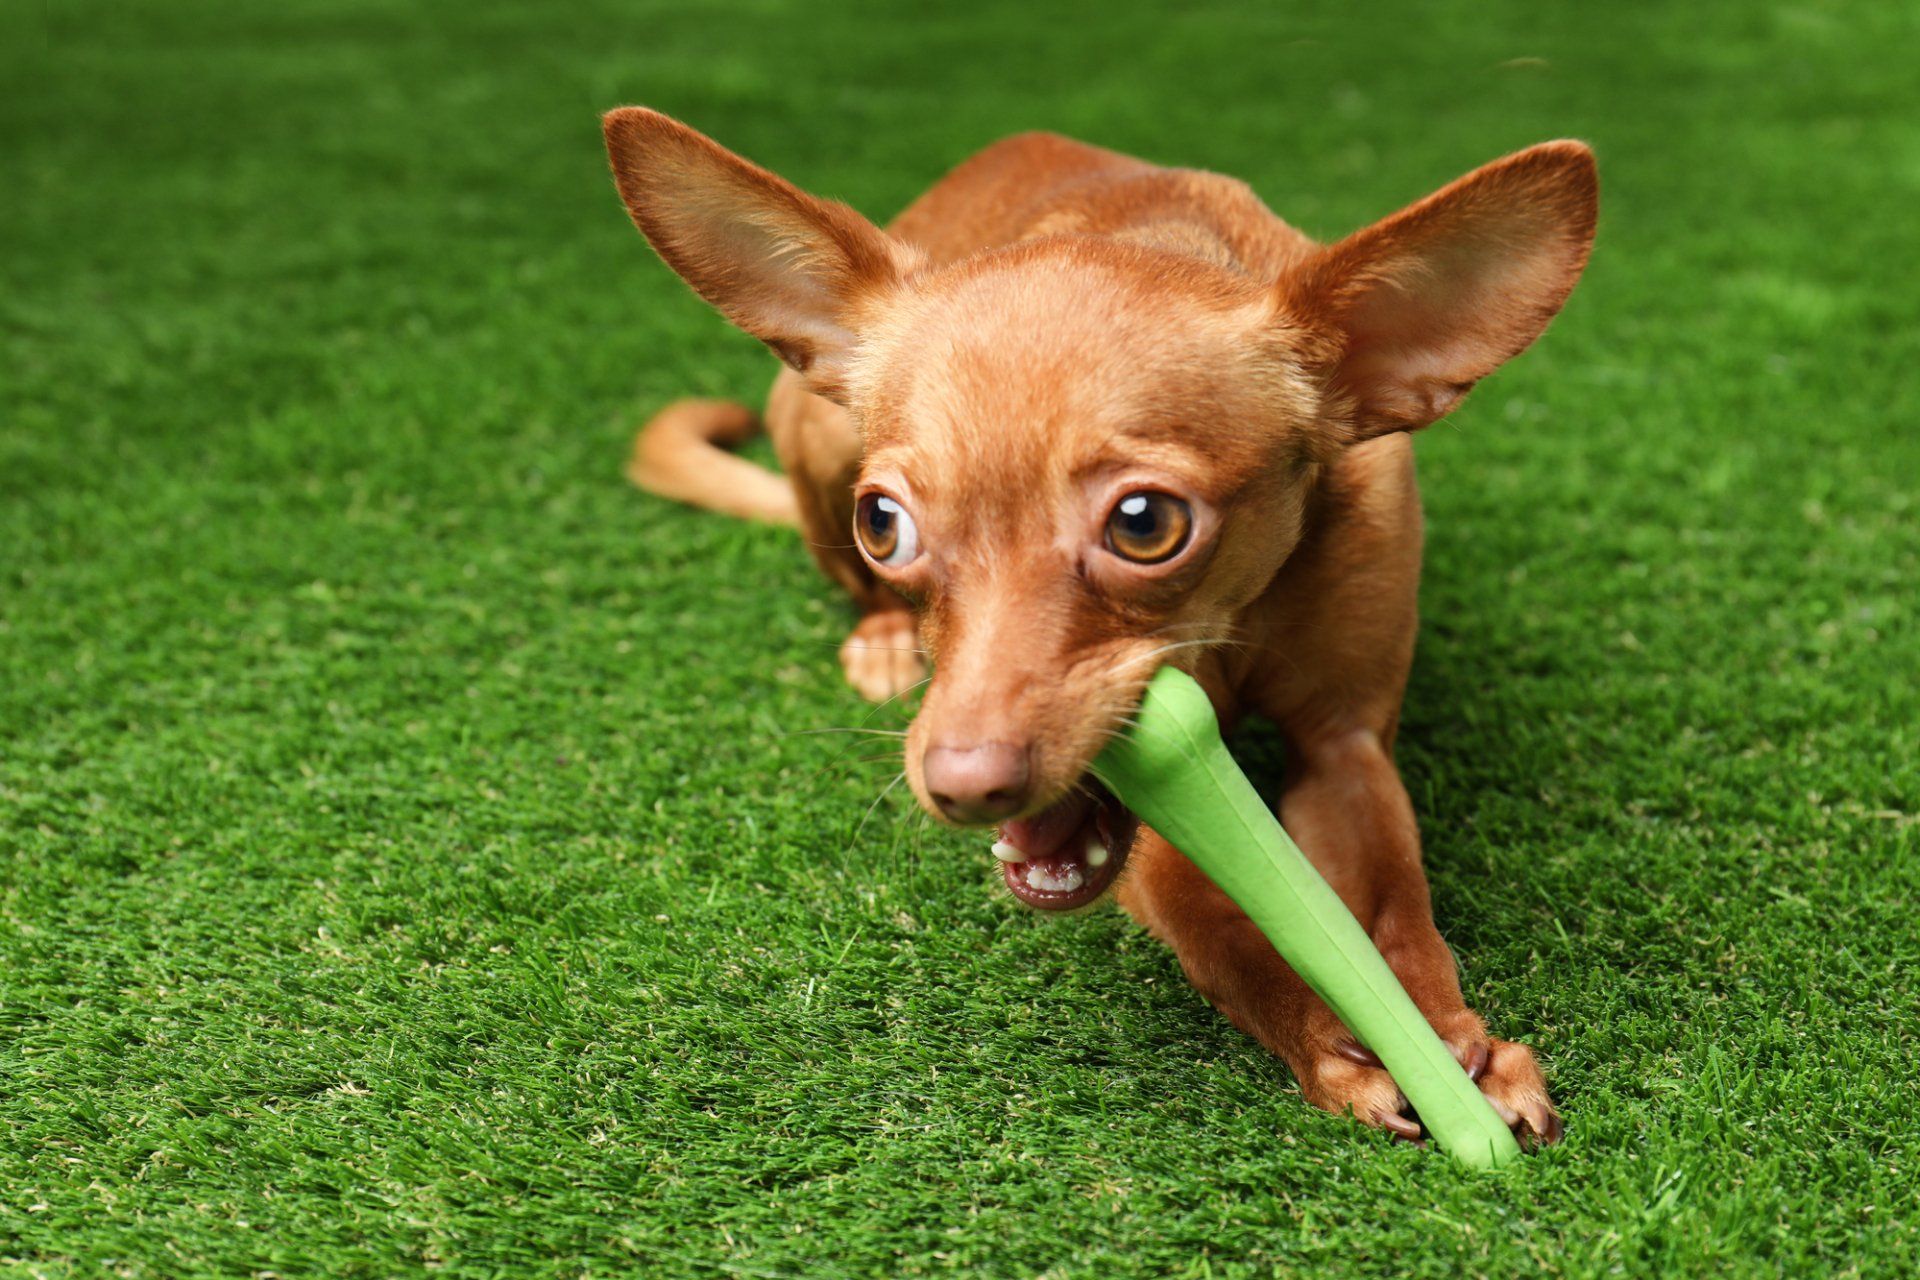 pet-friendly artificial turf designed and installed by Mesa Artificial Grass & Green pros